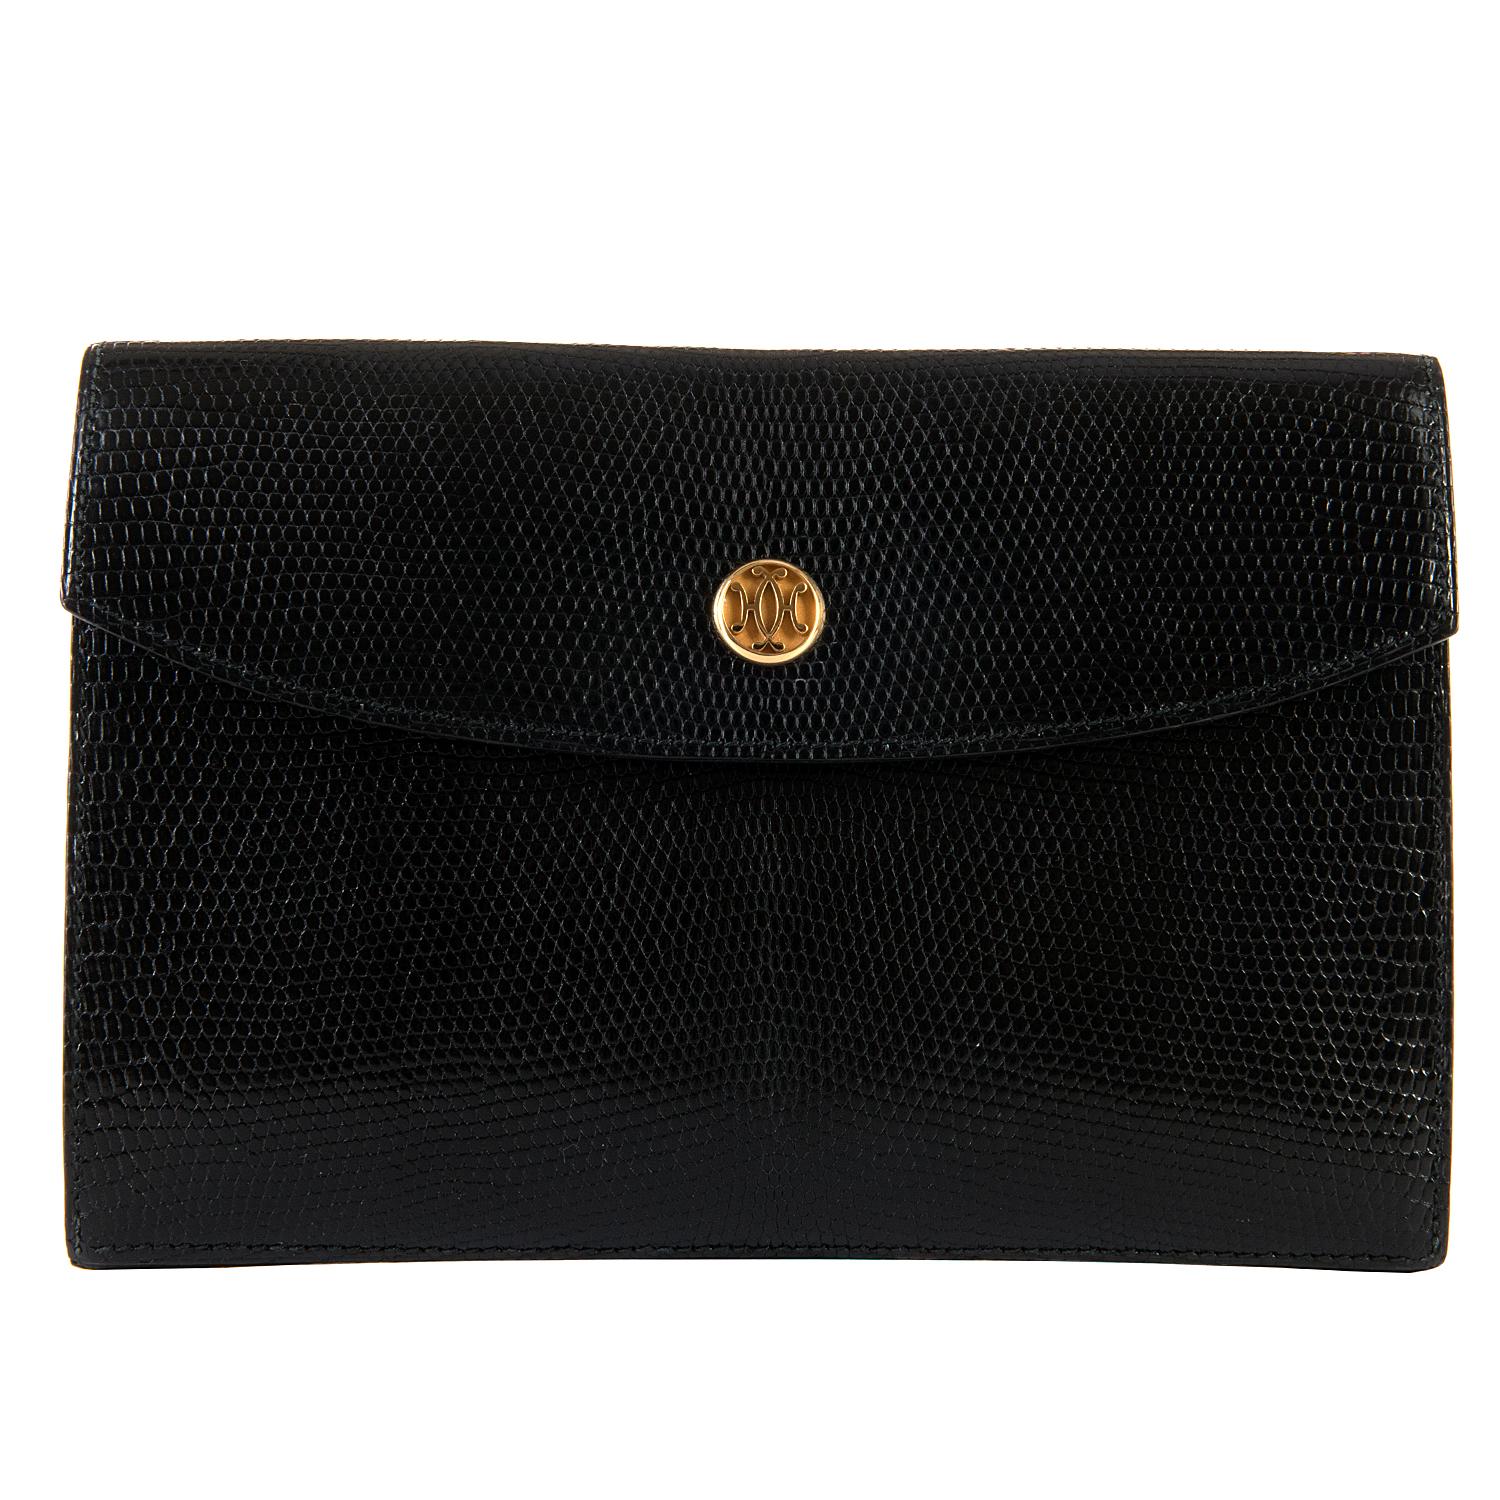 This Very Rare Vintage Hermes Black Lizard Clutch Bag is in pristine condition and is beautifully finished with an 18ct. plated gold clasp embossed with the makers famous  double 'H' logo. Still with its original Hermes dust sack. 